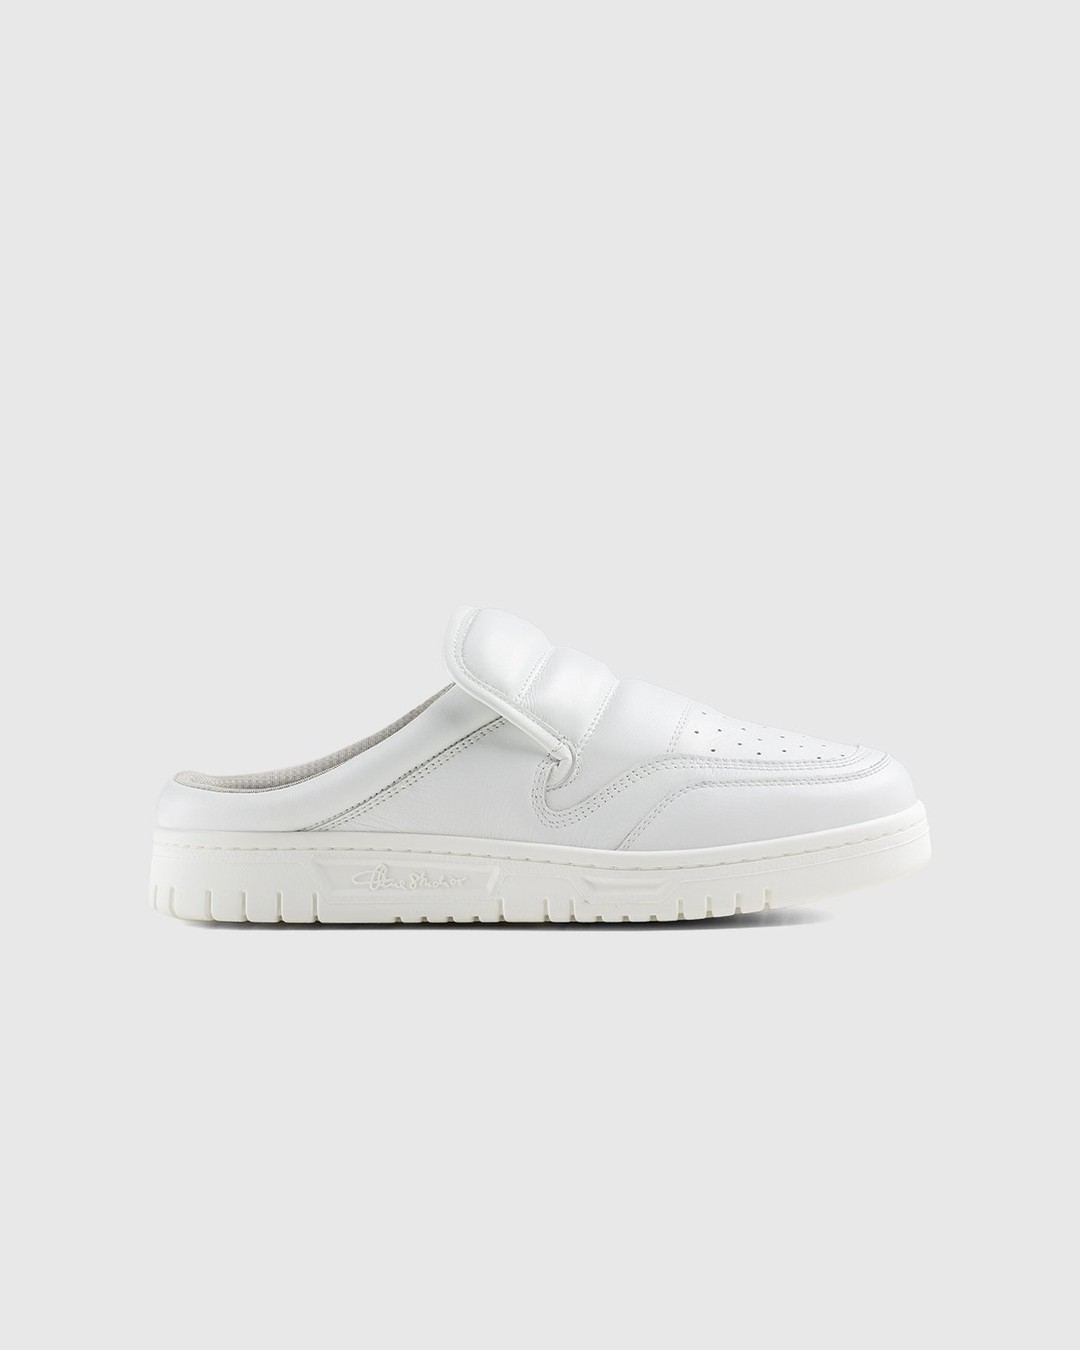 Acne Studios – Cow Leather Mule White - Mules - White - Image 1